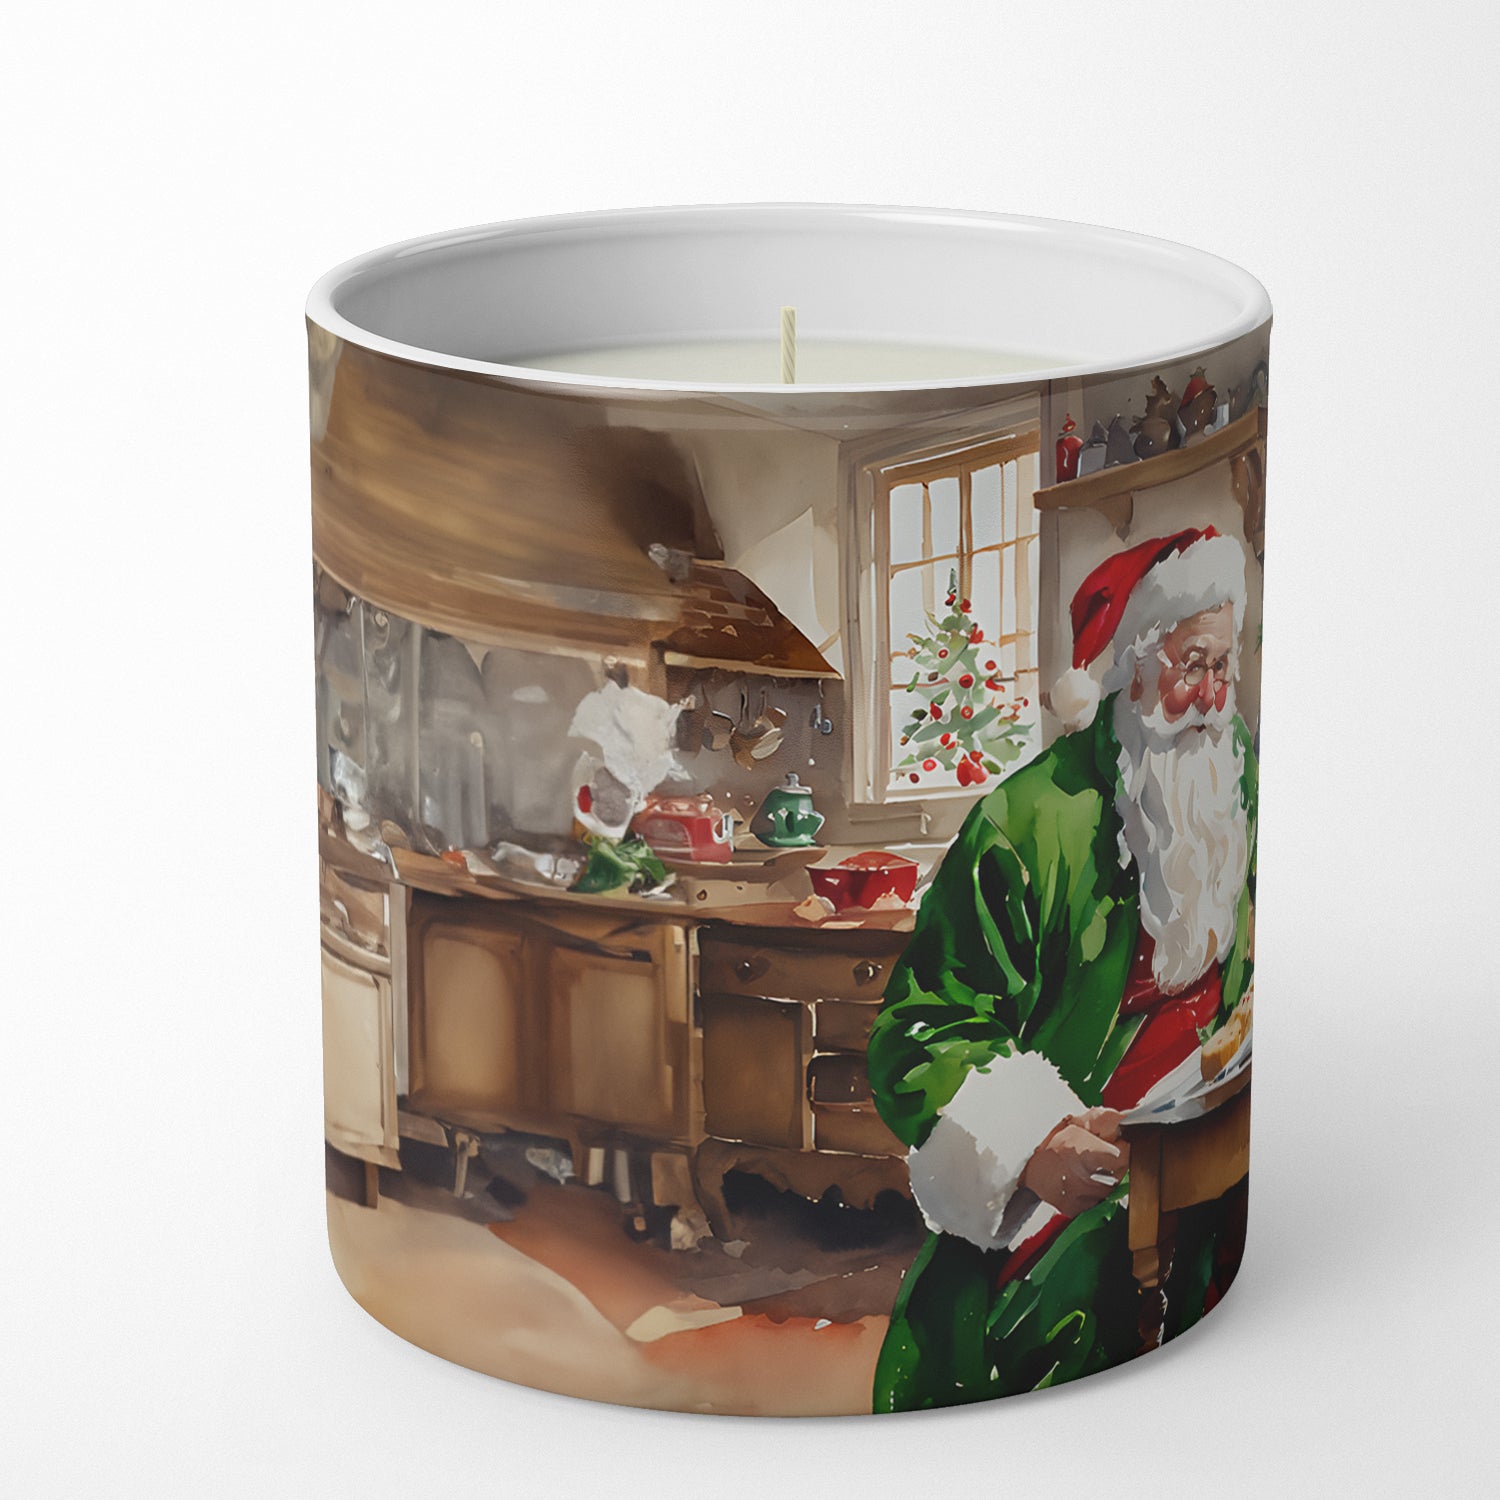 Cookies with Santa Claus Father Christmas Decorative Soy Candle